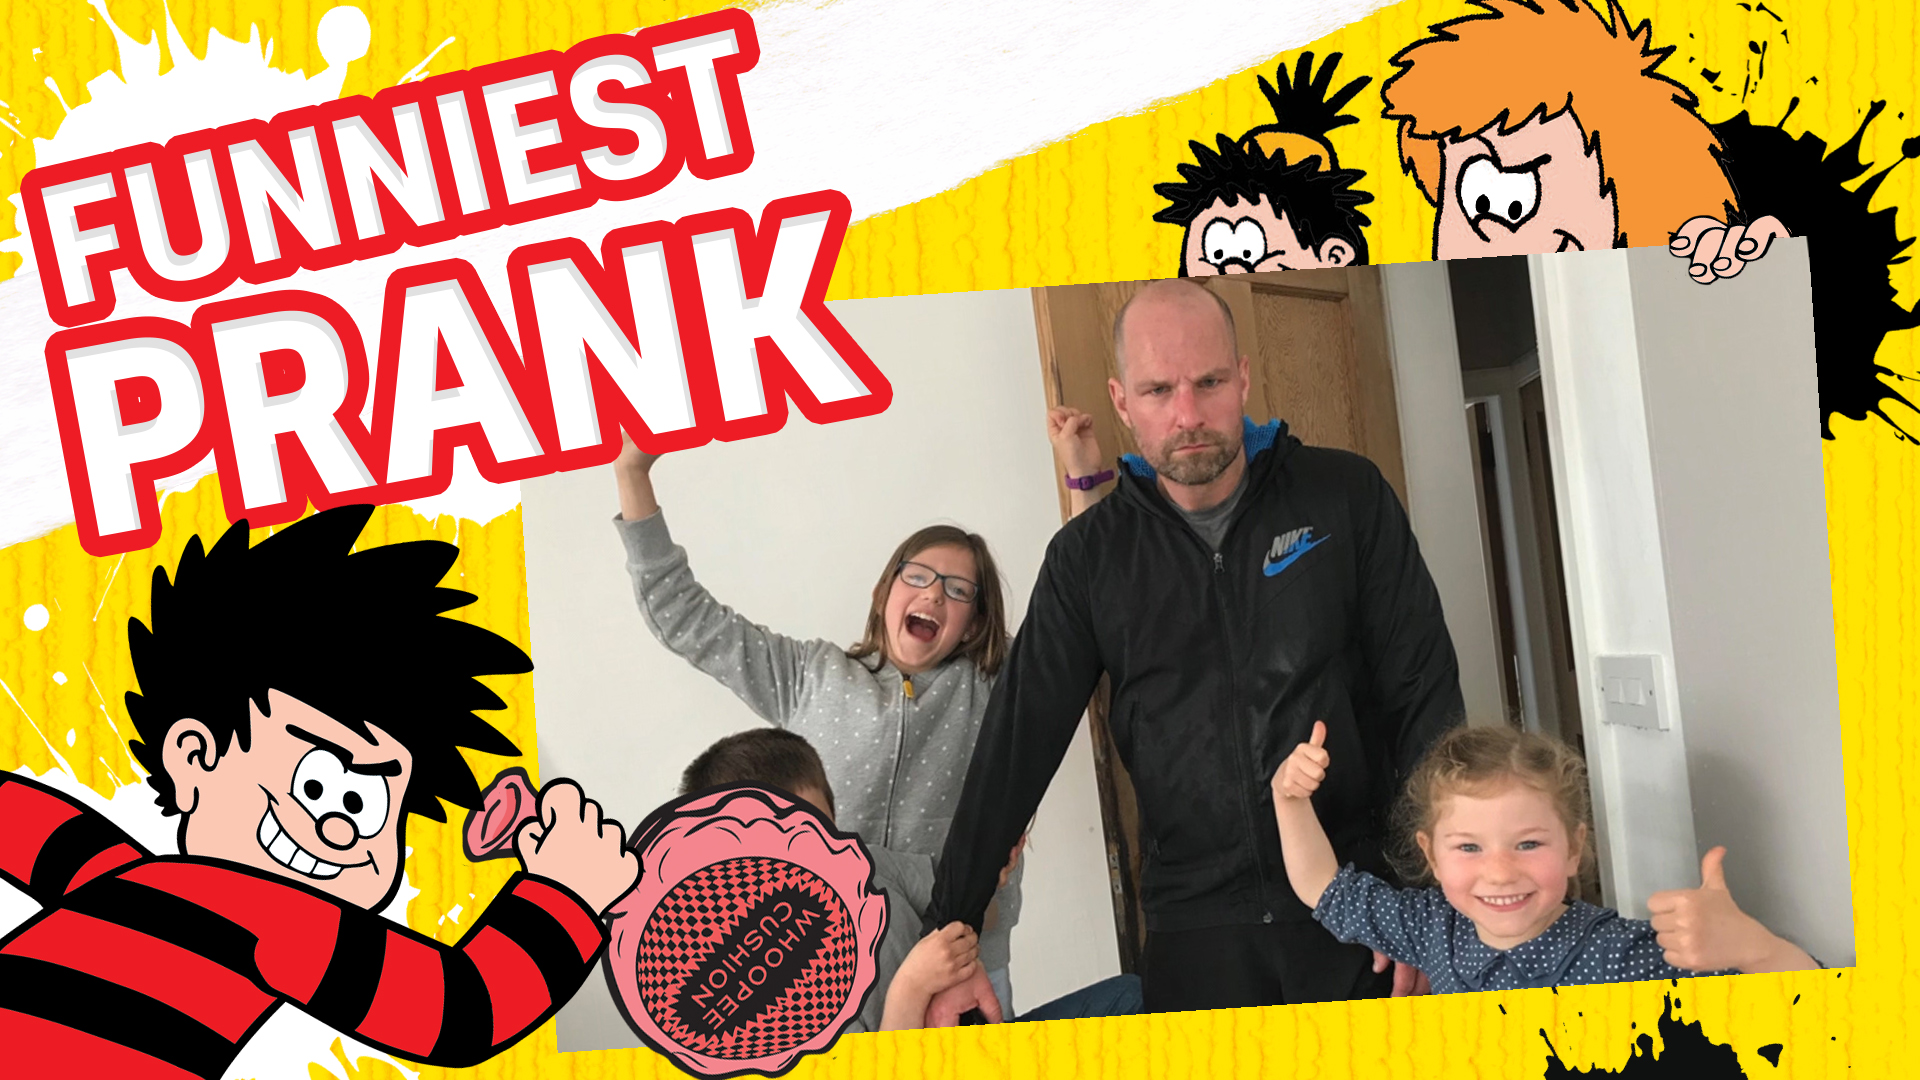 Funniest Family Prank! - Get Inspired